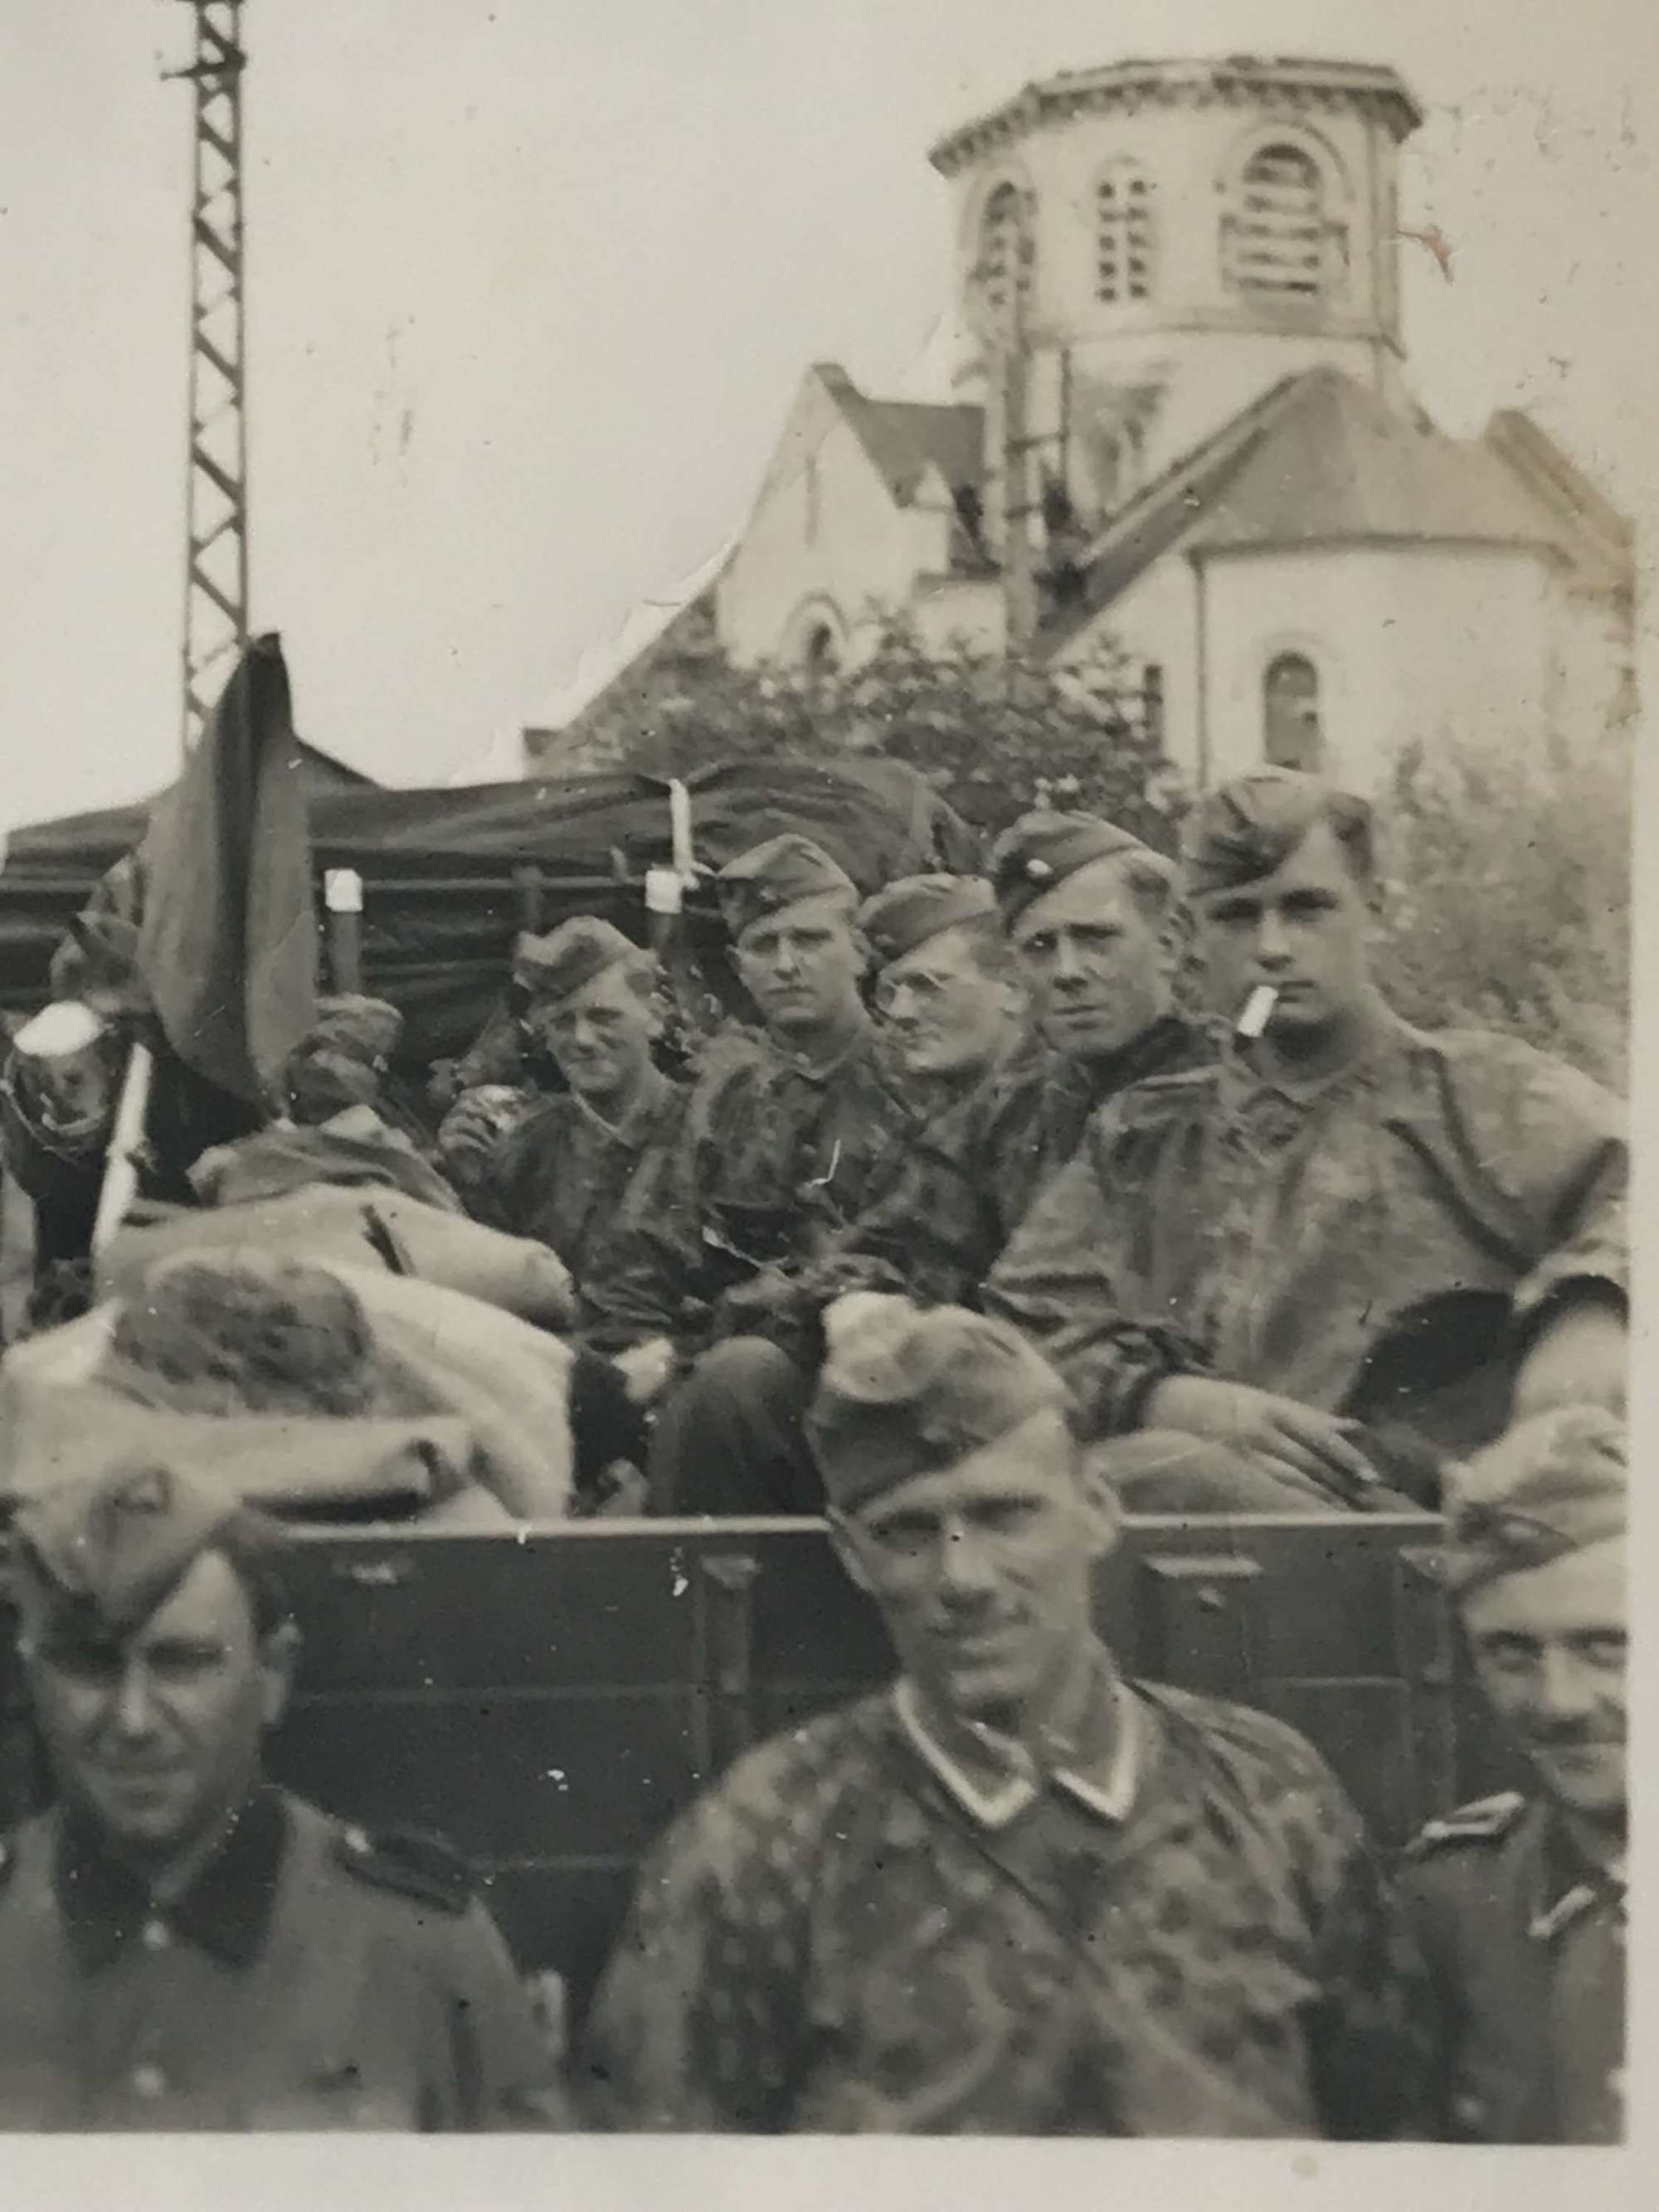 Image of Waffen SS soldiers in camo smocks.